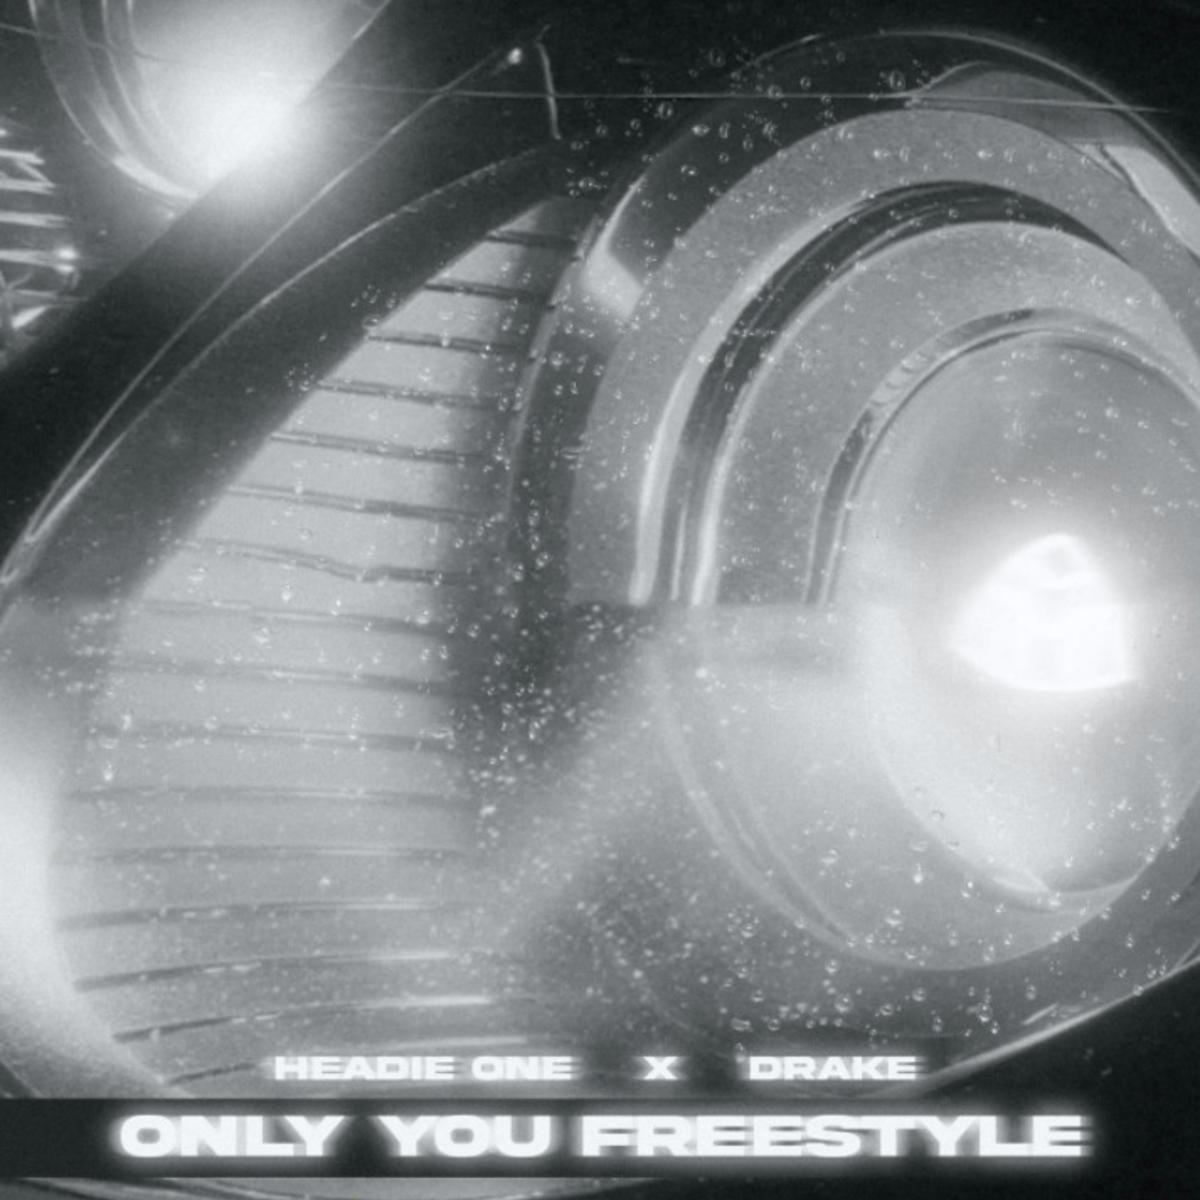 Drake & Headie One Link Up For “Only You Freestyle”